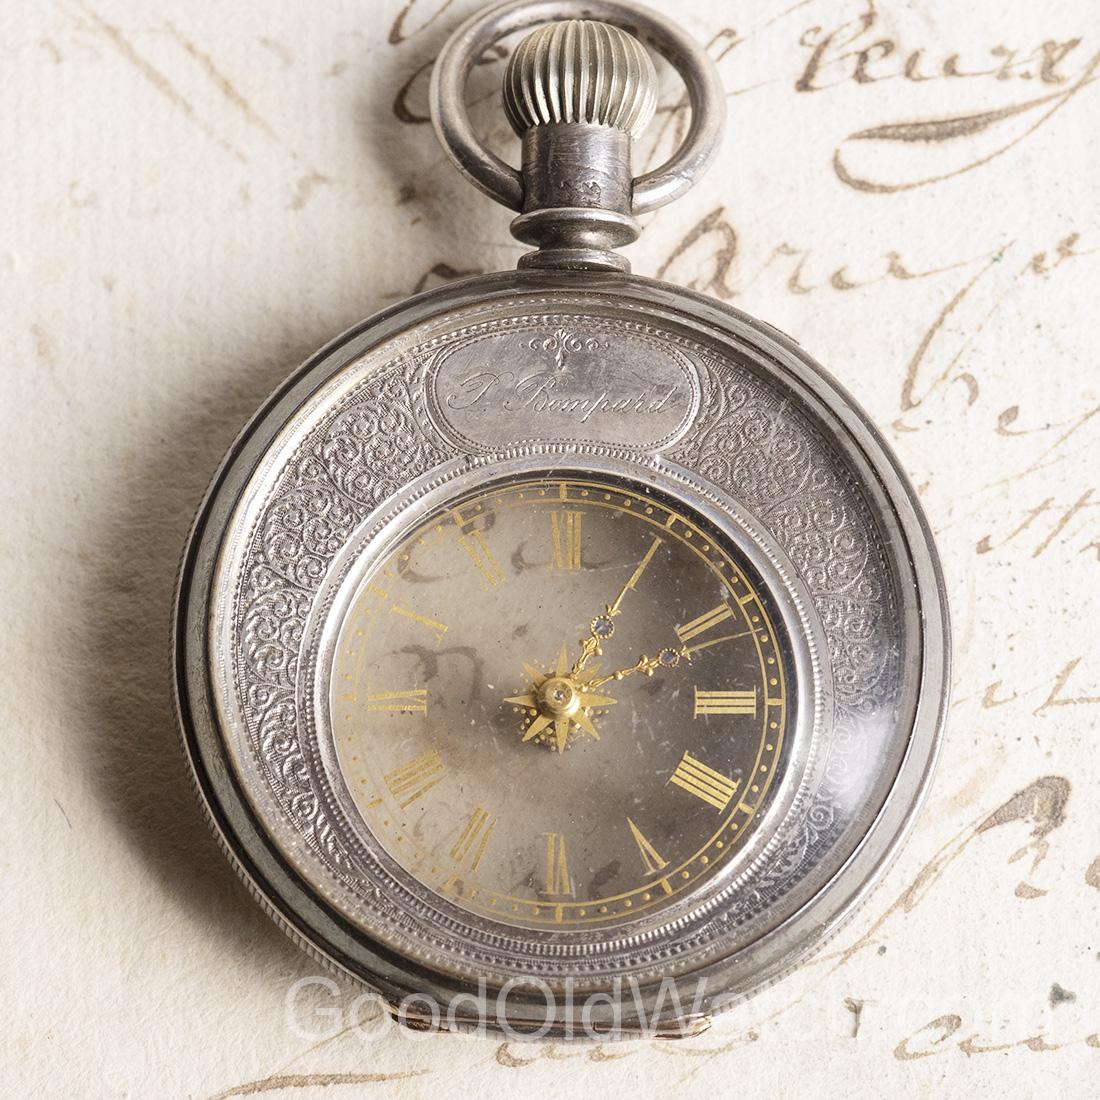 Mysterious Pocket Watch With Crescent-Shaped Movement from 1890